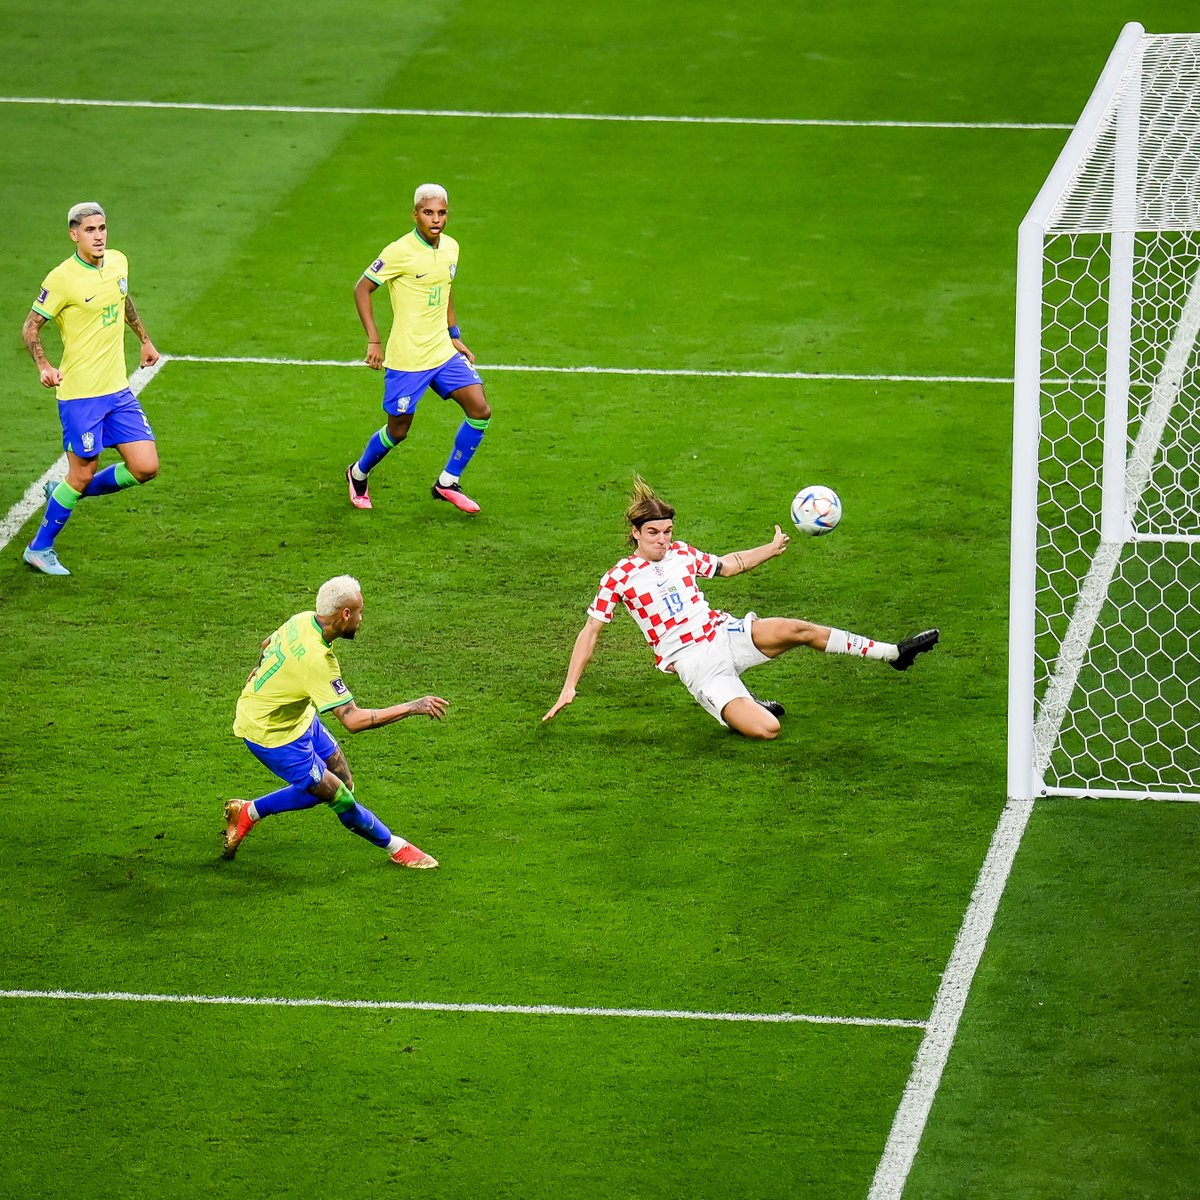 What has been the best goal of the 2022 World Cup so far?